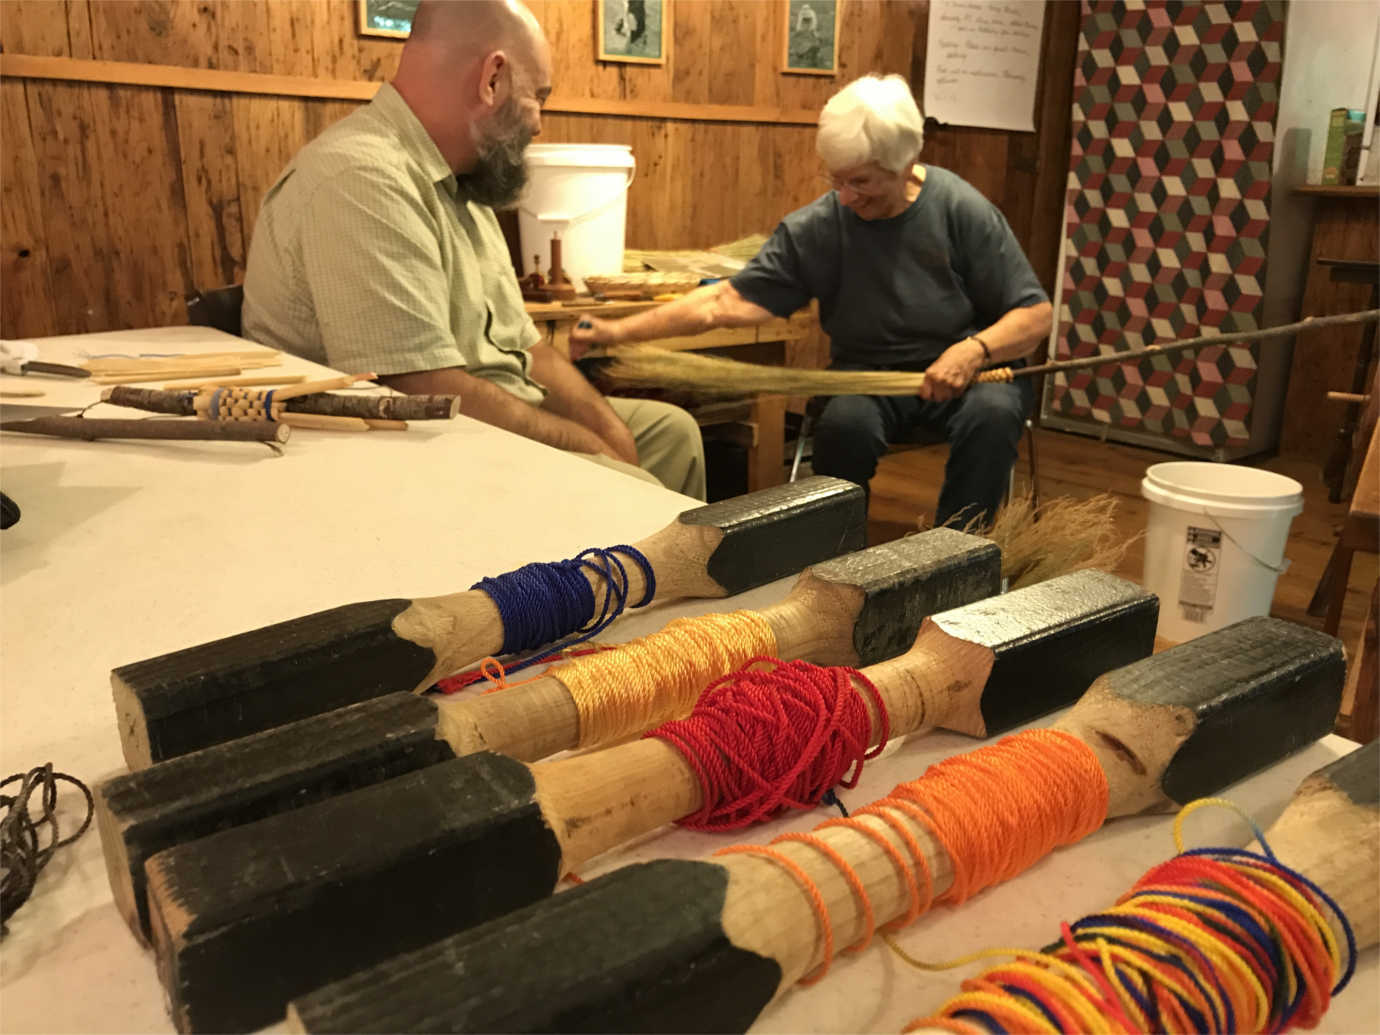 Foxfire offers regular classes teaching folk skills such as yarn spinning and broom making. Image courtesy of the Foxfire Center.